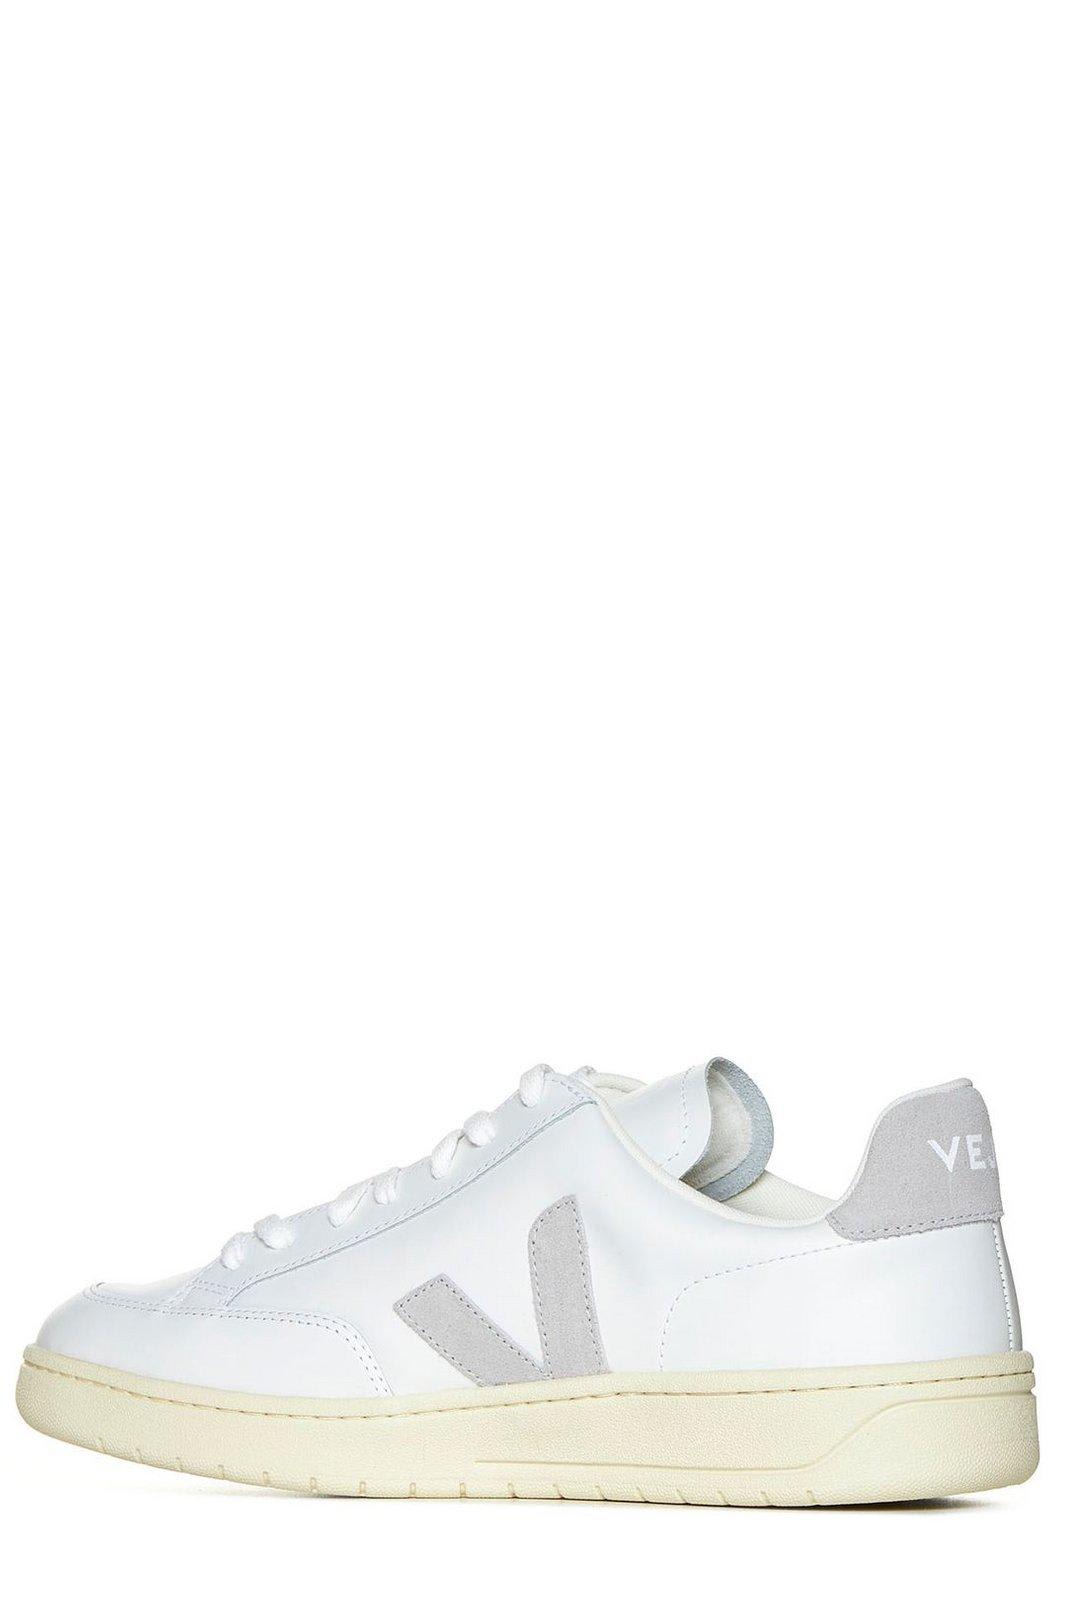 Shop Veja Round Toe Lace-up Sneakers In White